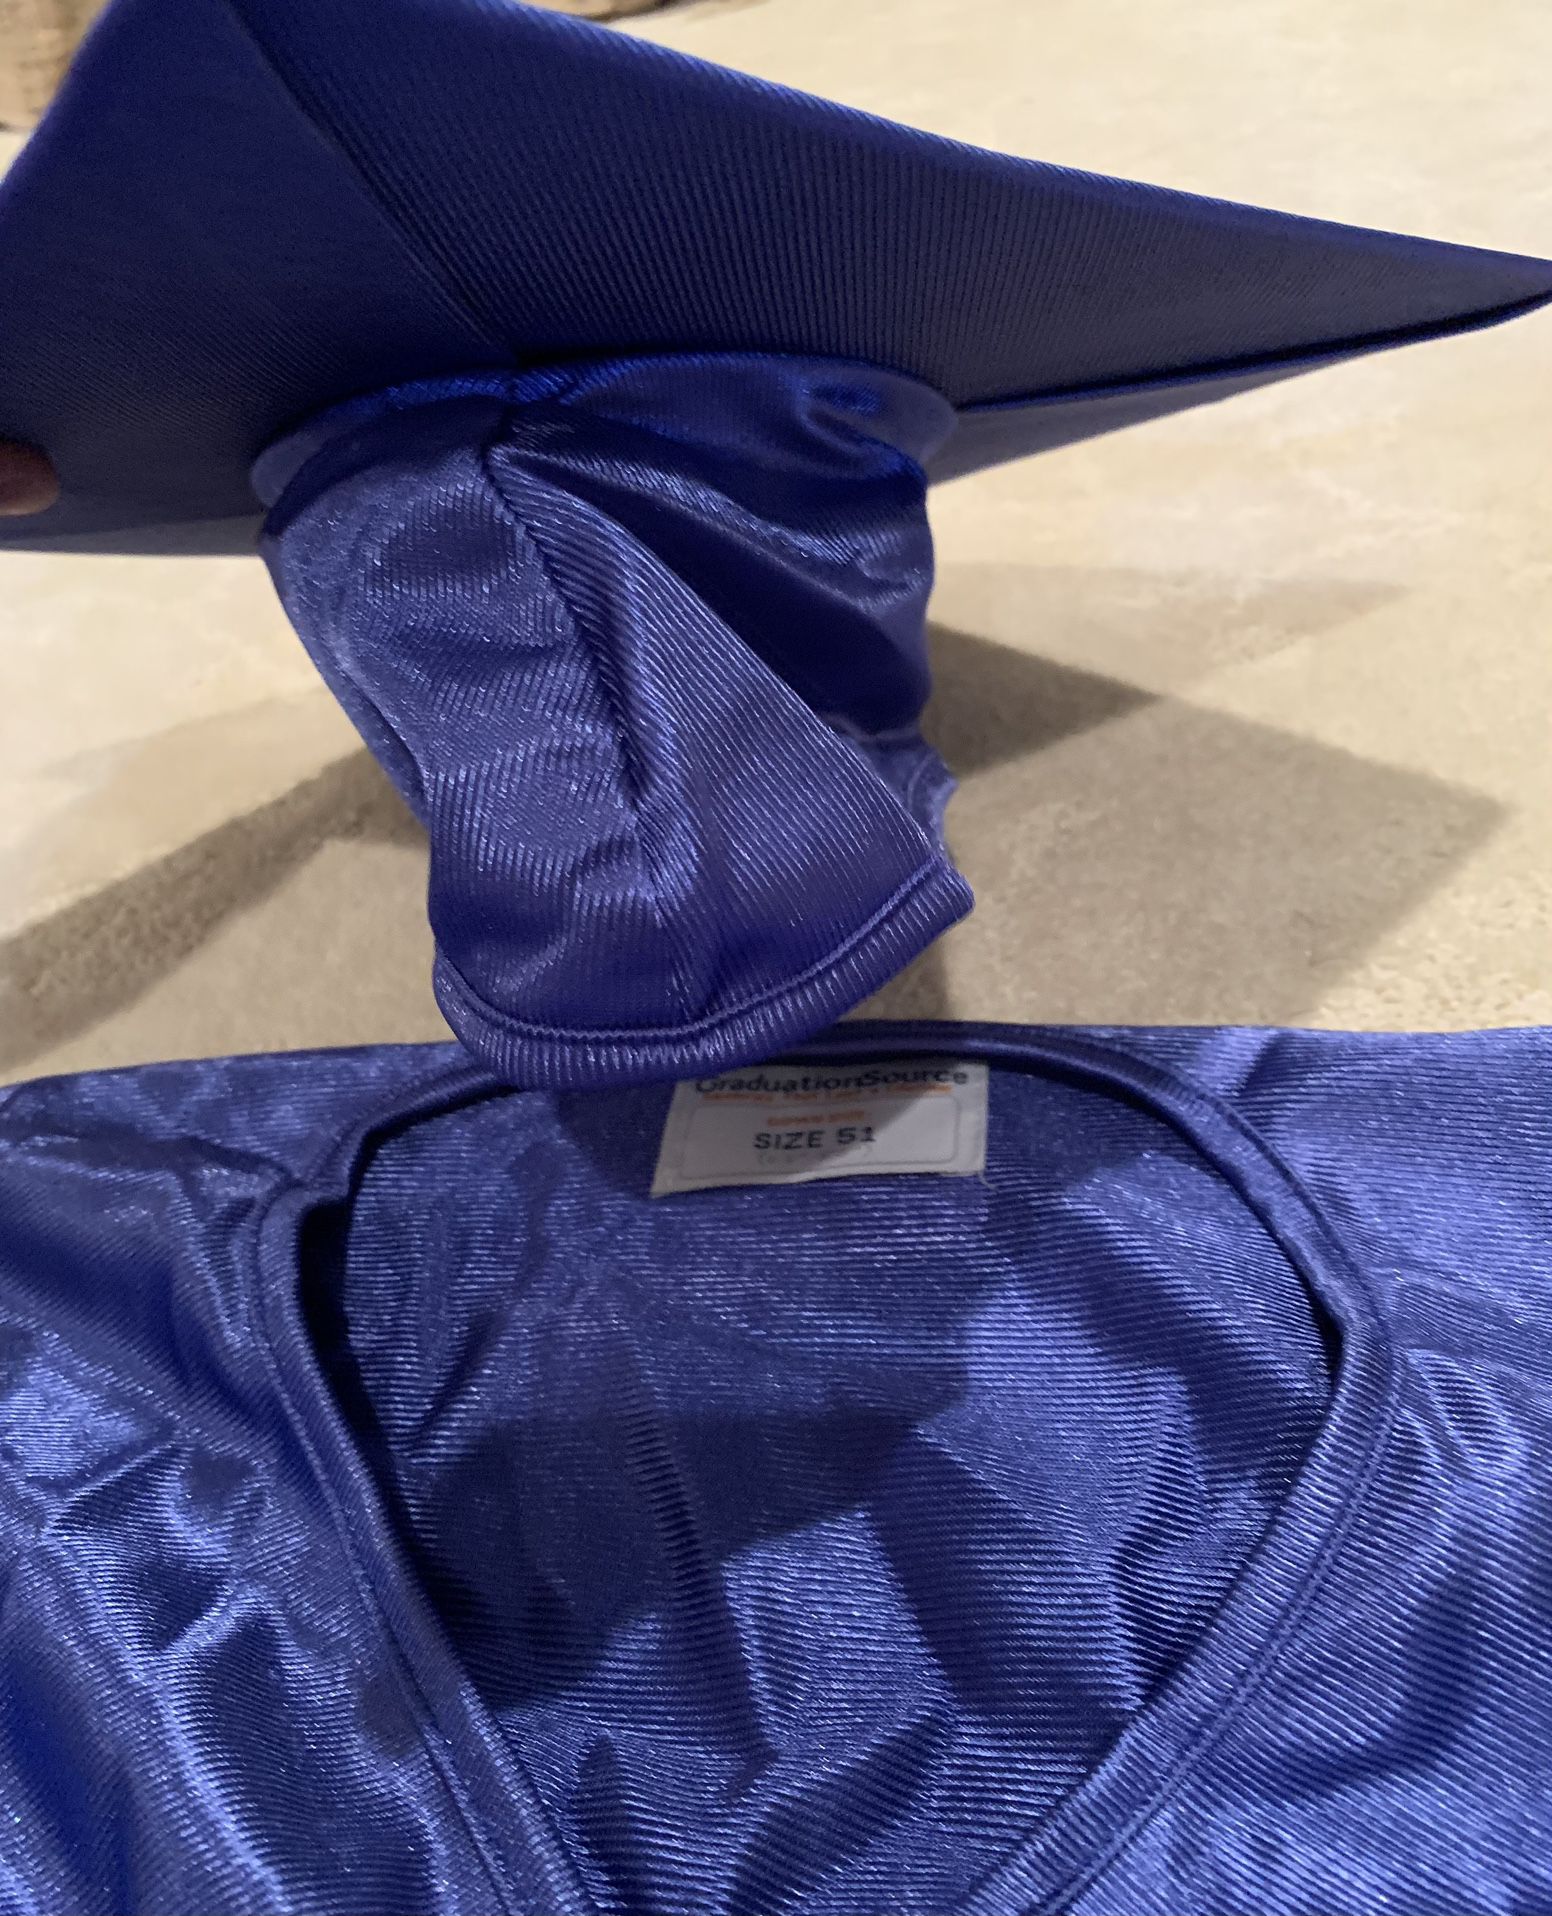 Adult Graduation Cap And Gown ( 2 Gowns Available)